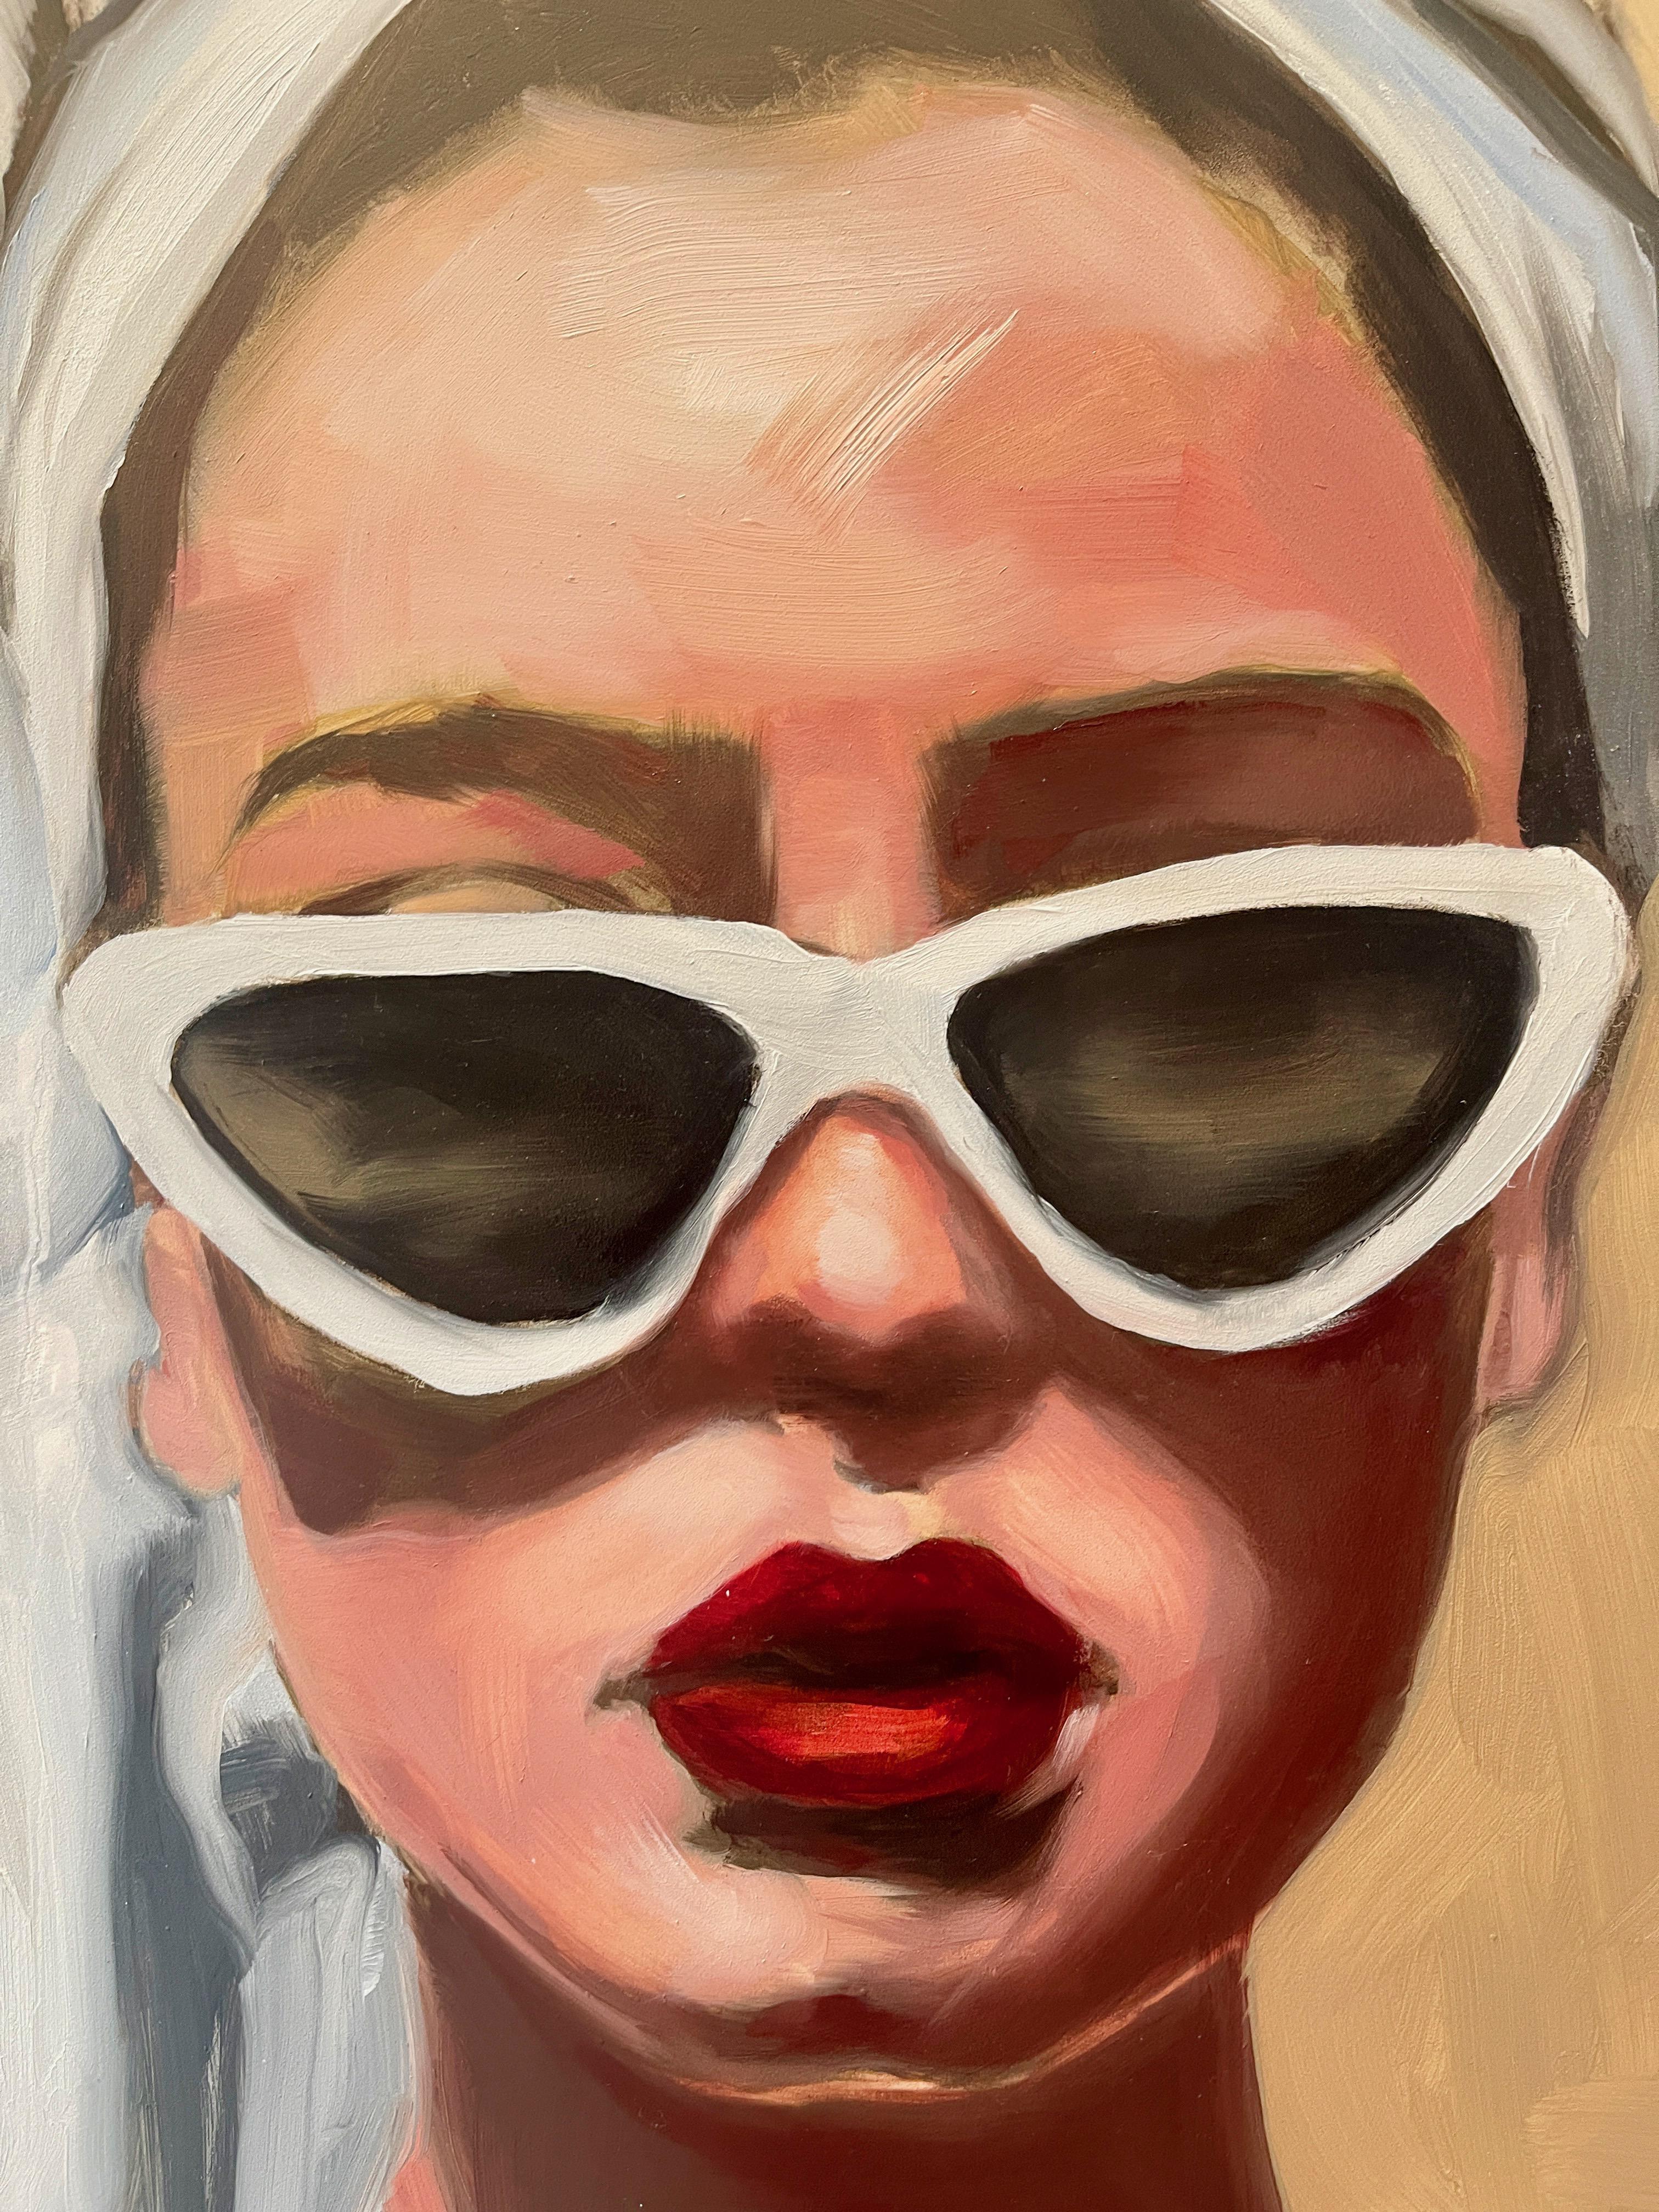 <p>Artist Comments<br>A woman exudes timeless elegance with her white sunglasses and bold red lipstick. Paint drips from the beach towel wrapped around her hair, suggesting the presence of water. The portrait's warm palette and loose brushstrokes